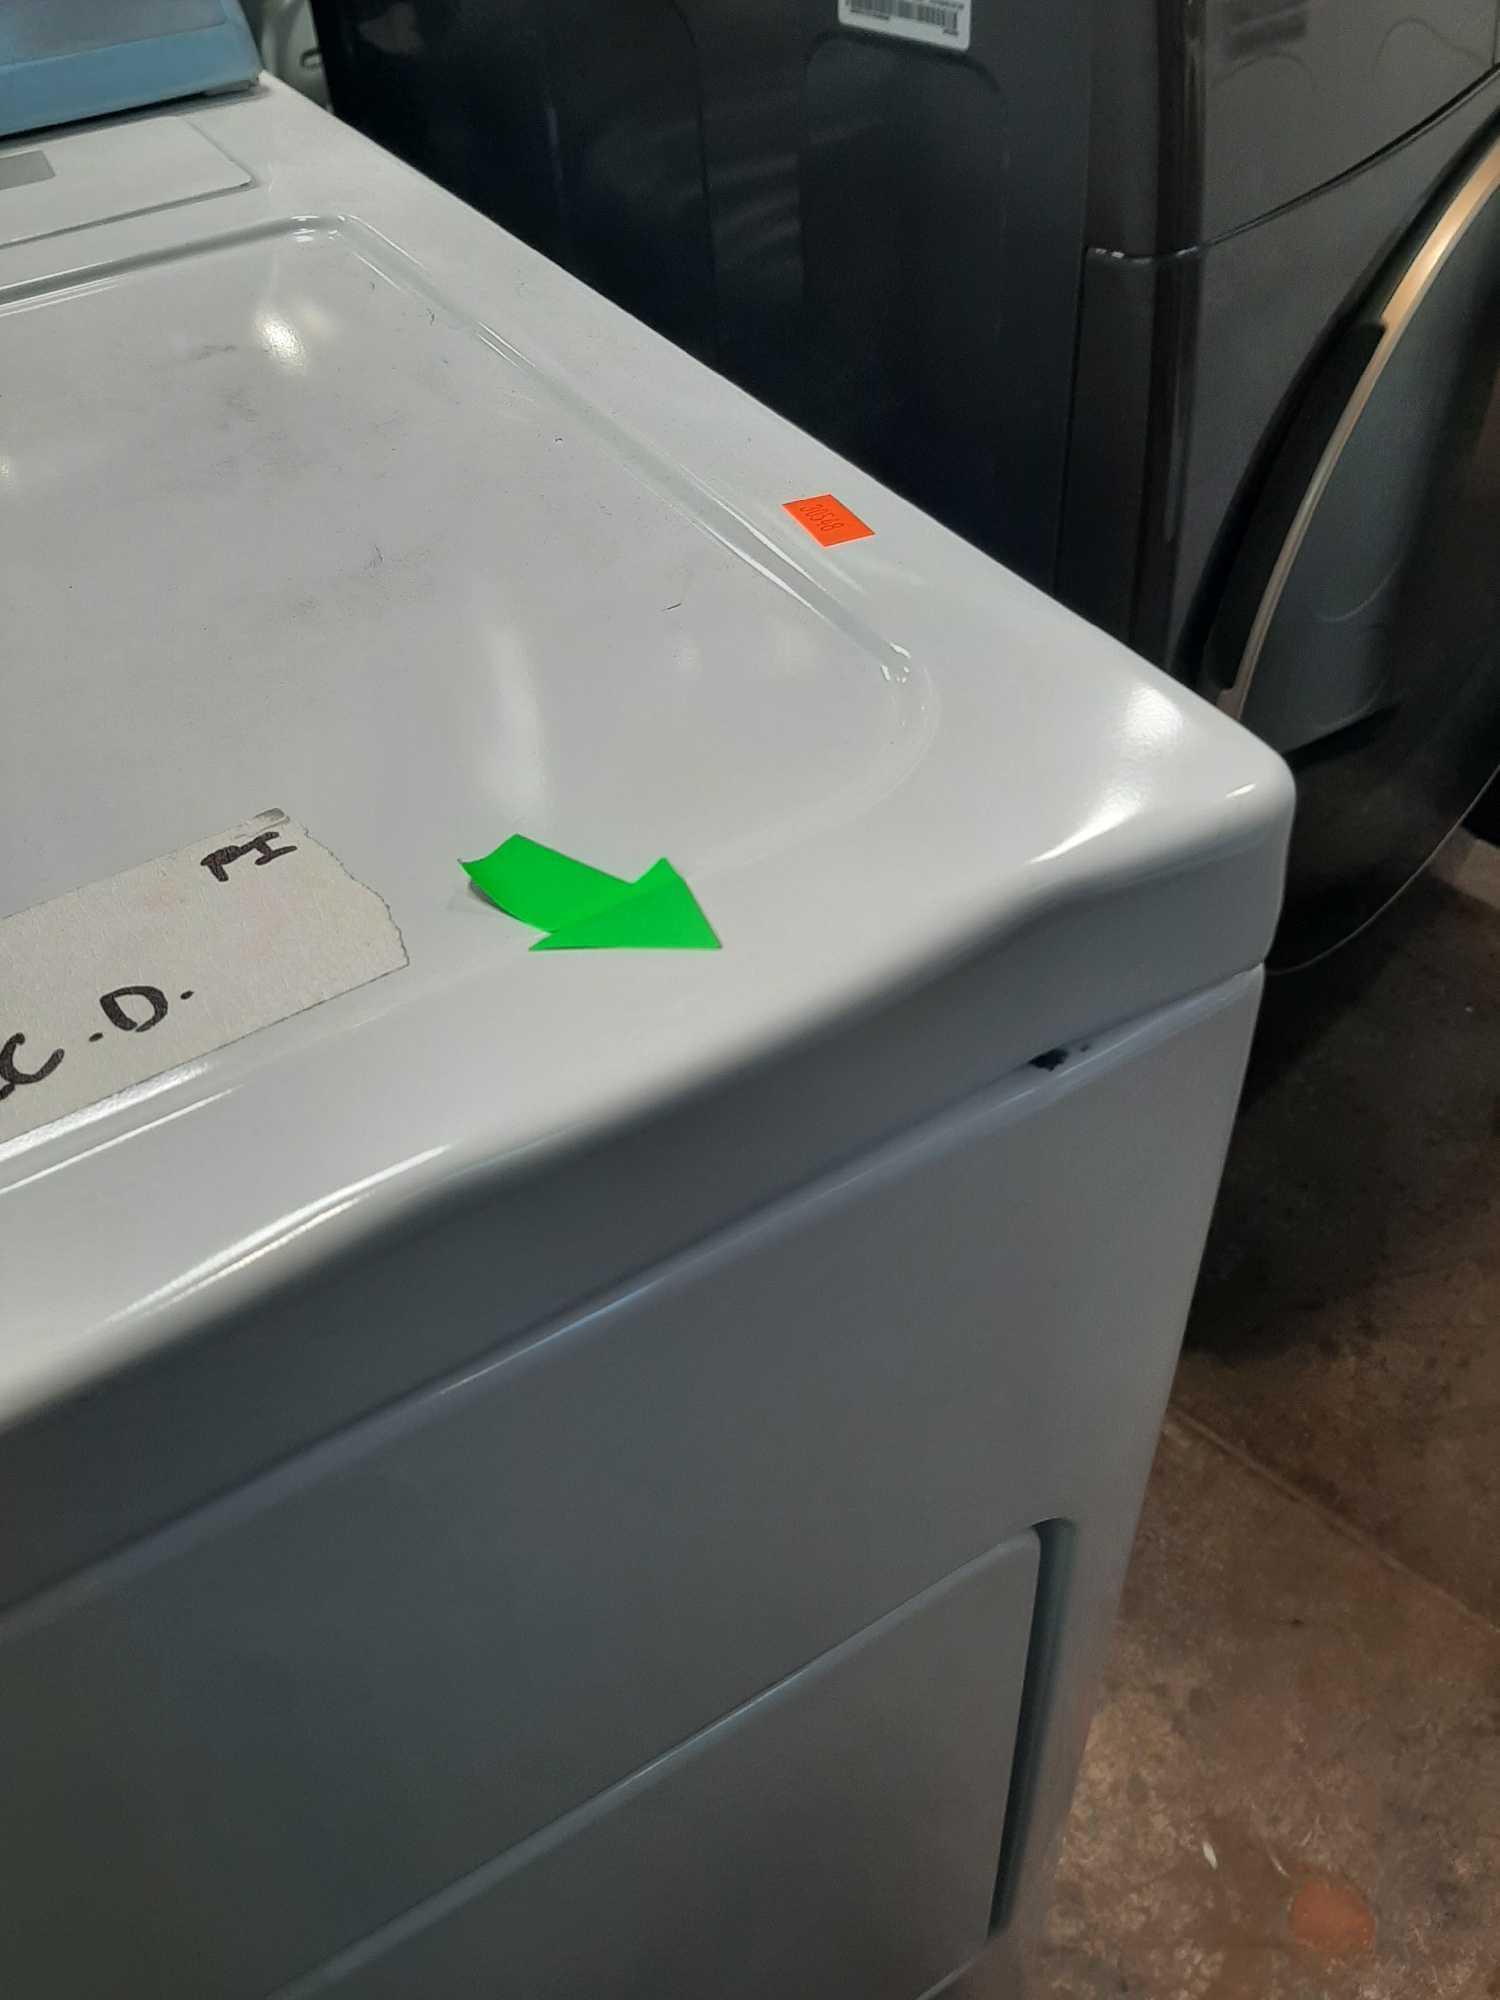 Whirlpool 7 Cu. Ft. Electric Dryer*PREVIOUSLY INSTALLED*